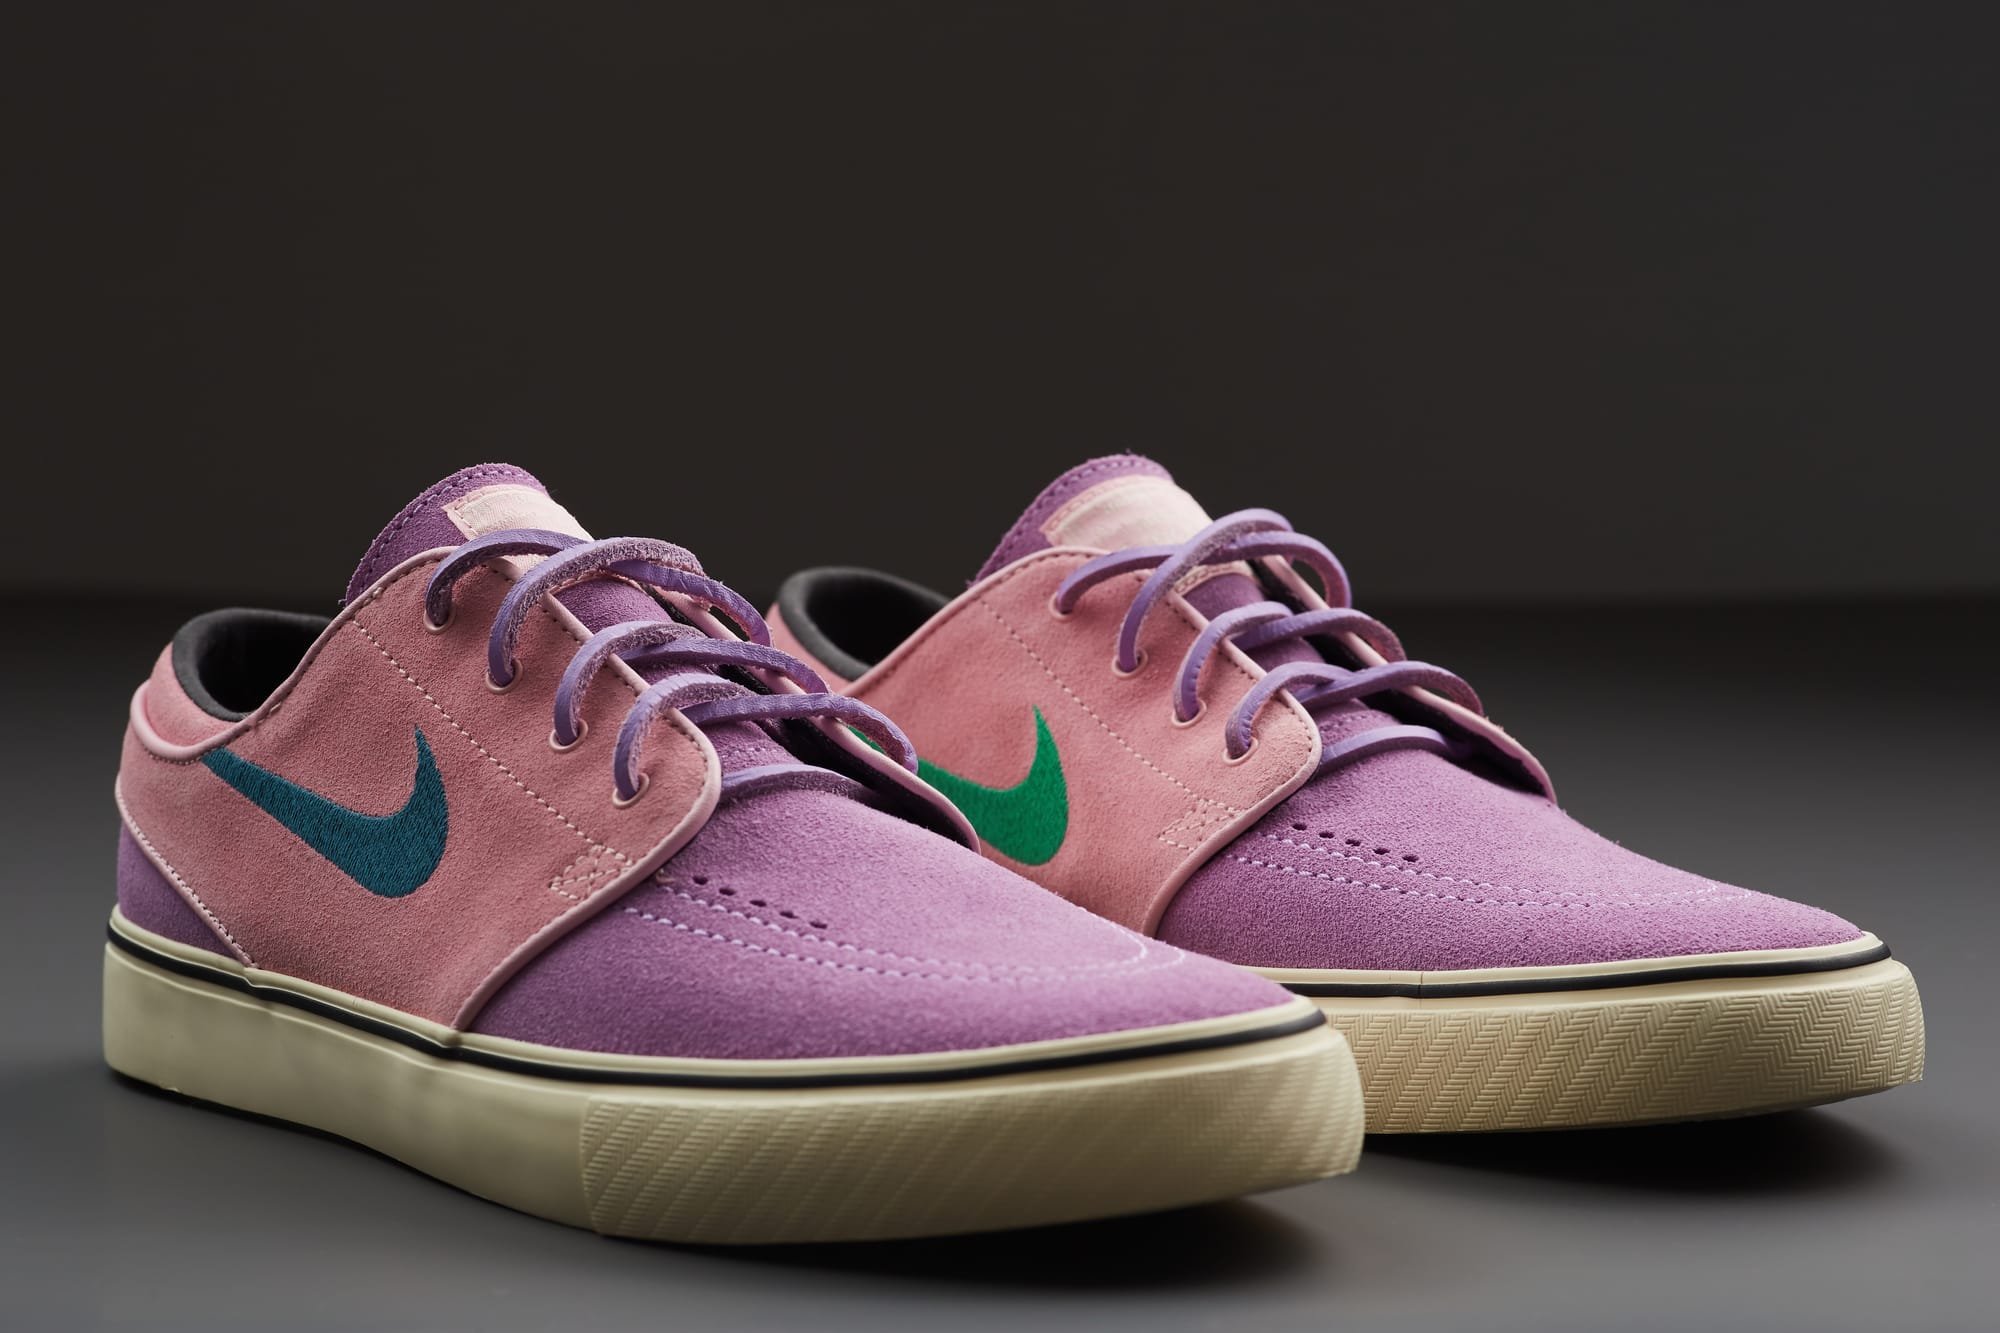 A Sneaker Review Of The Nike SB Zoom Janoski OG+ Skate Shoes